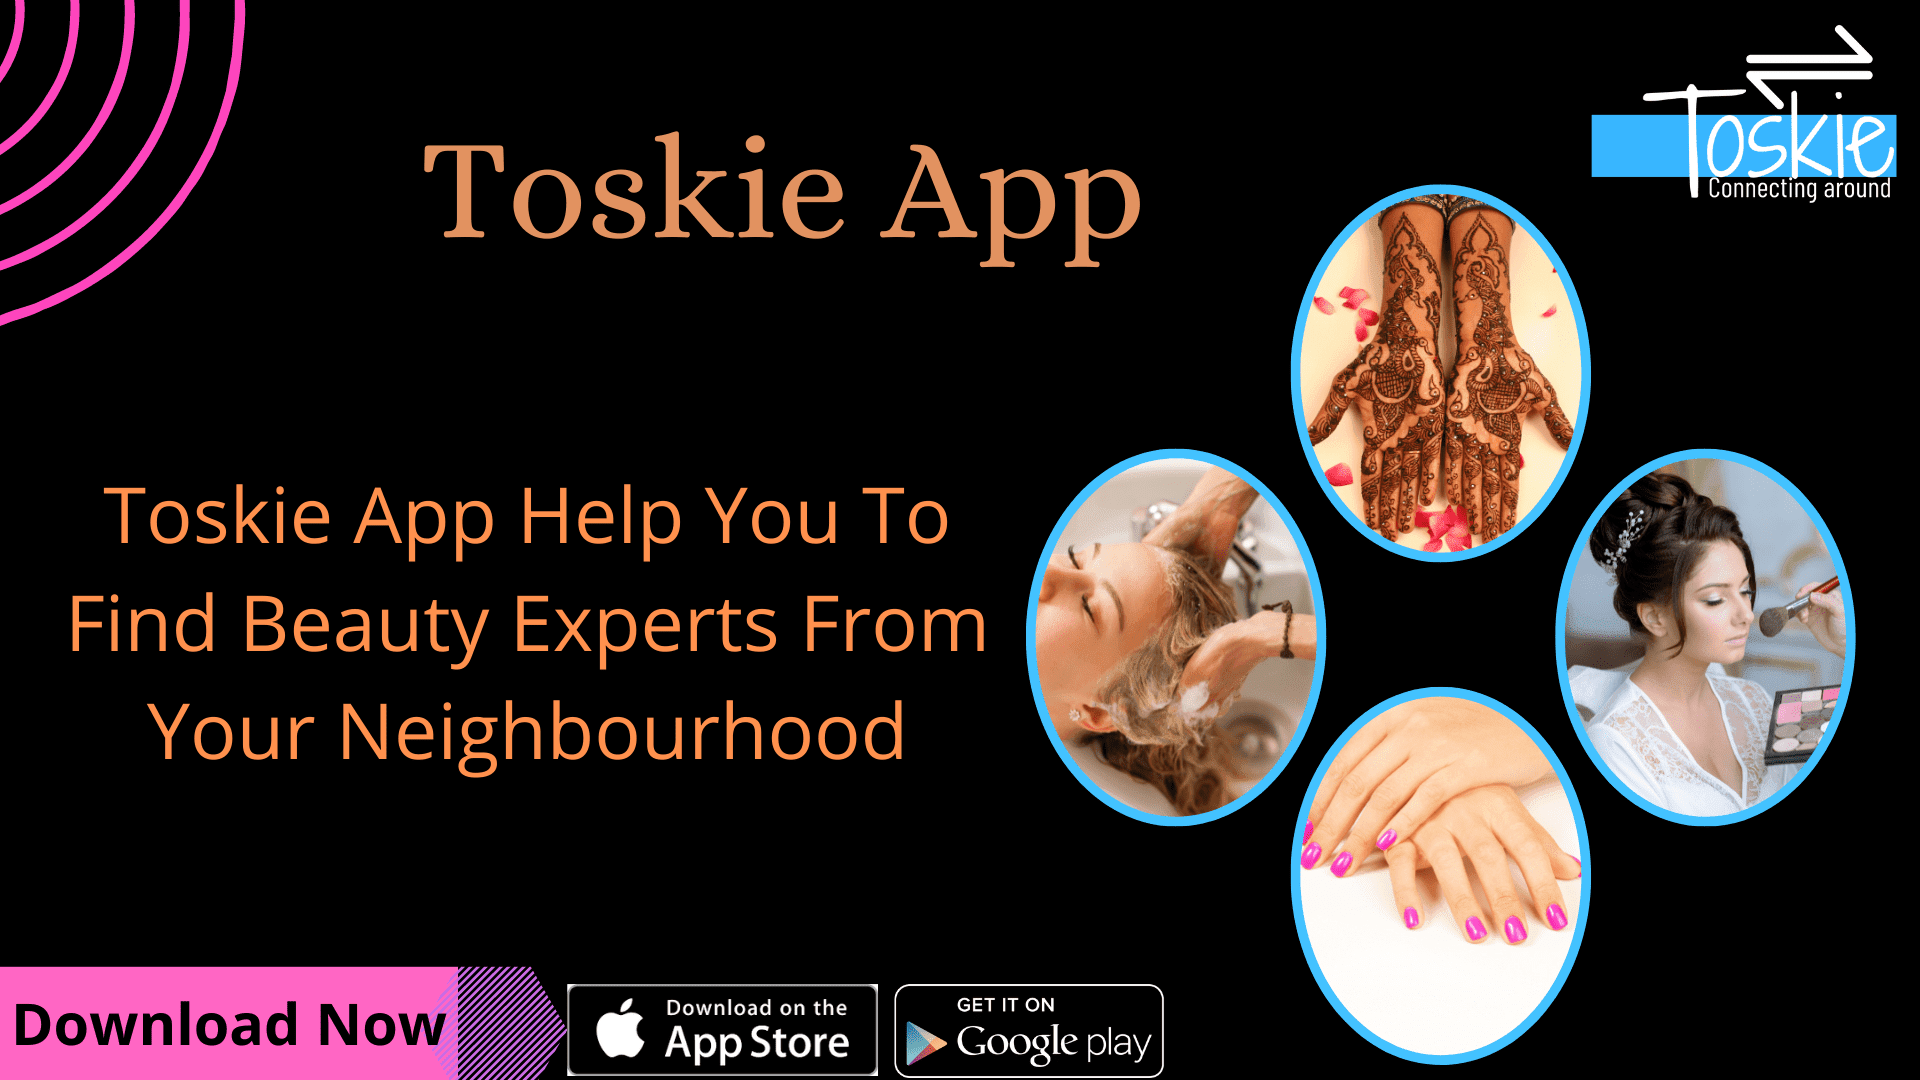 Searching For Beauticians Near Me? Here's How Toskie Can Help!